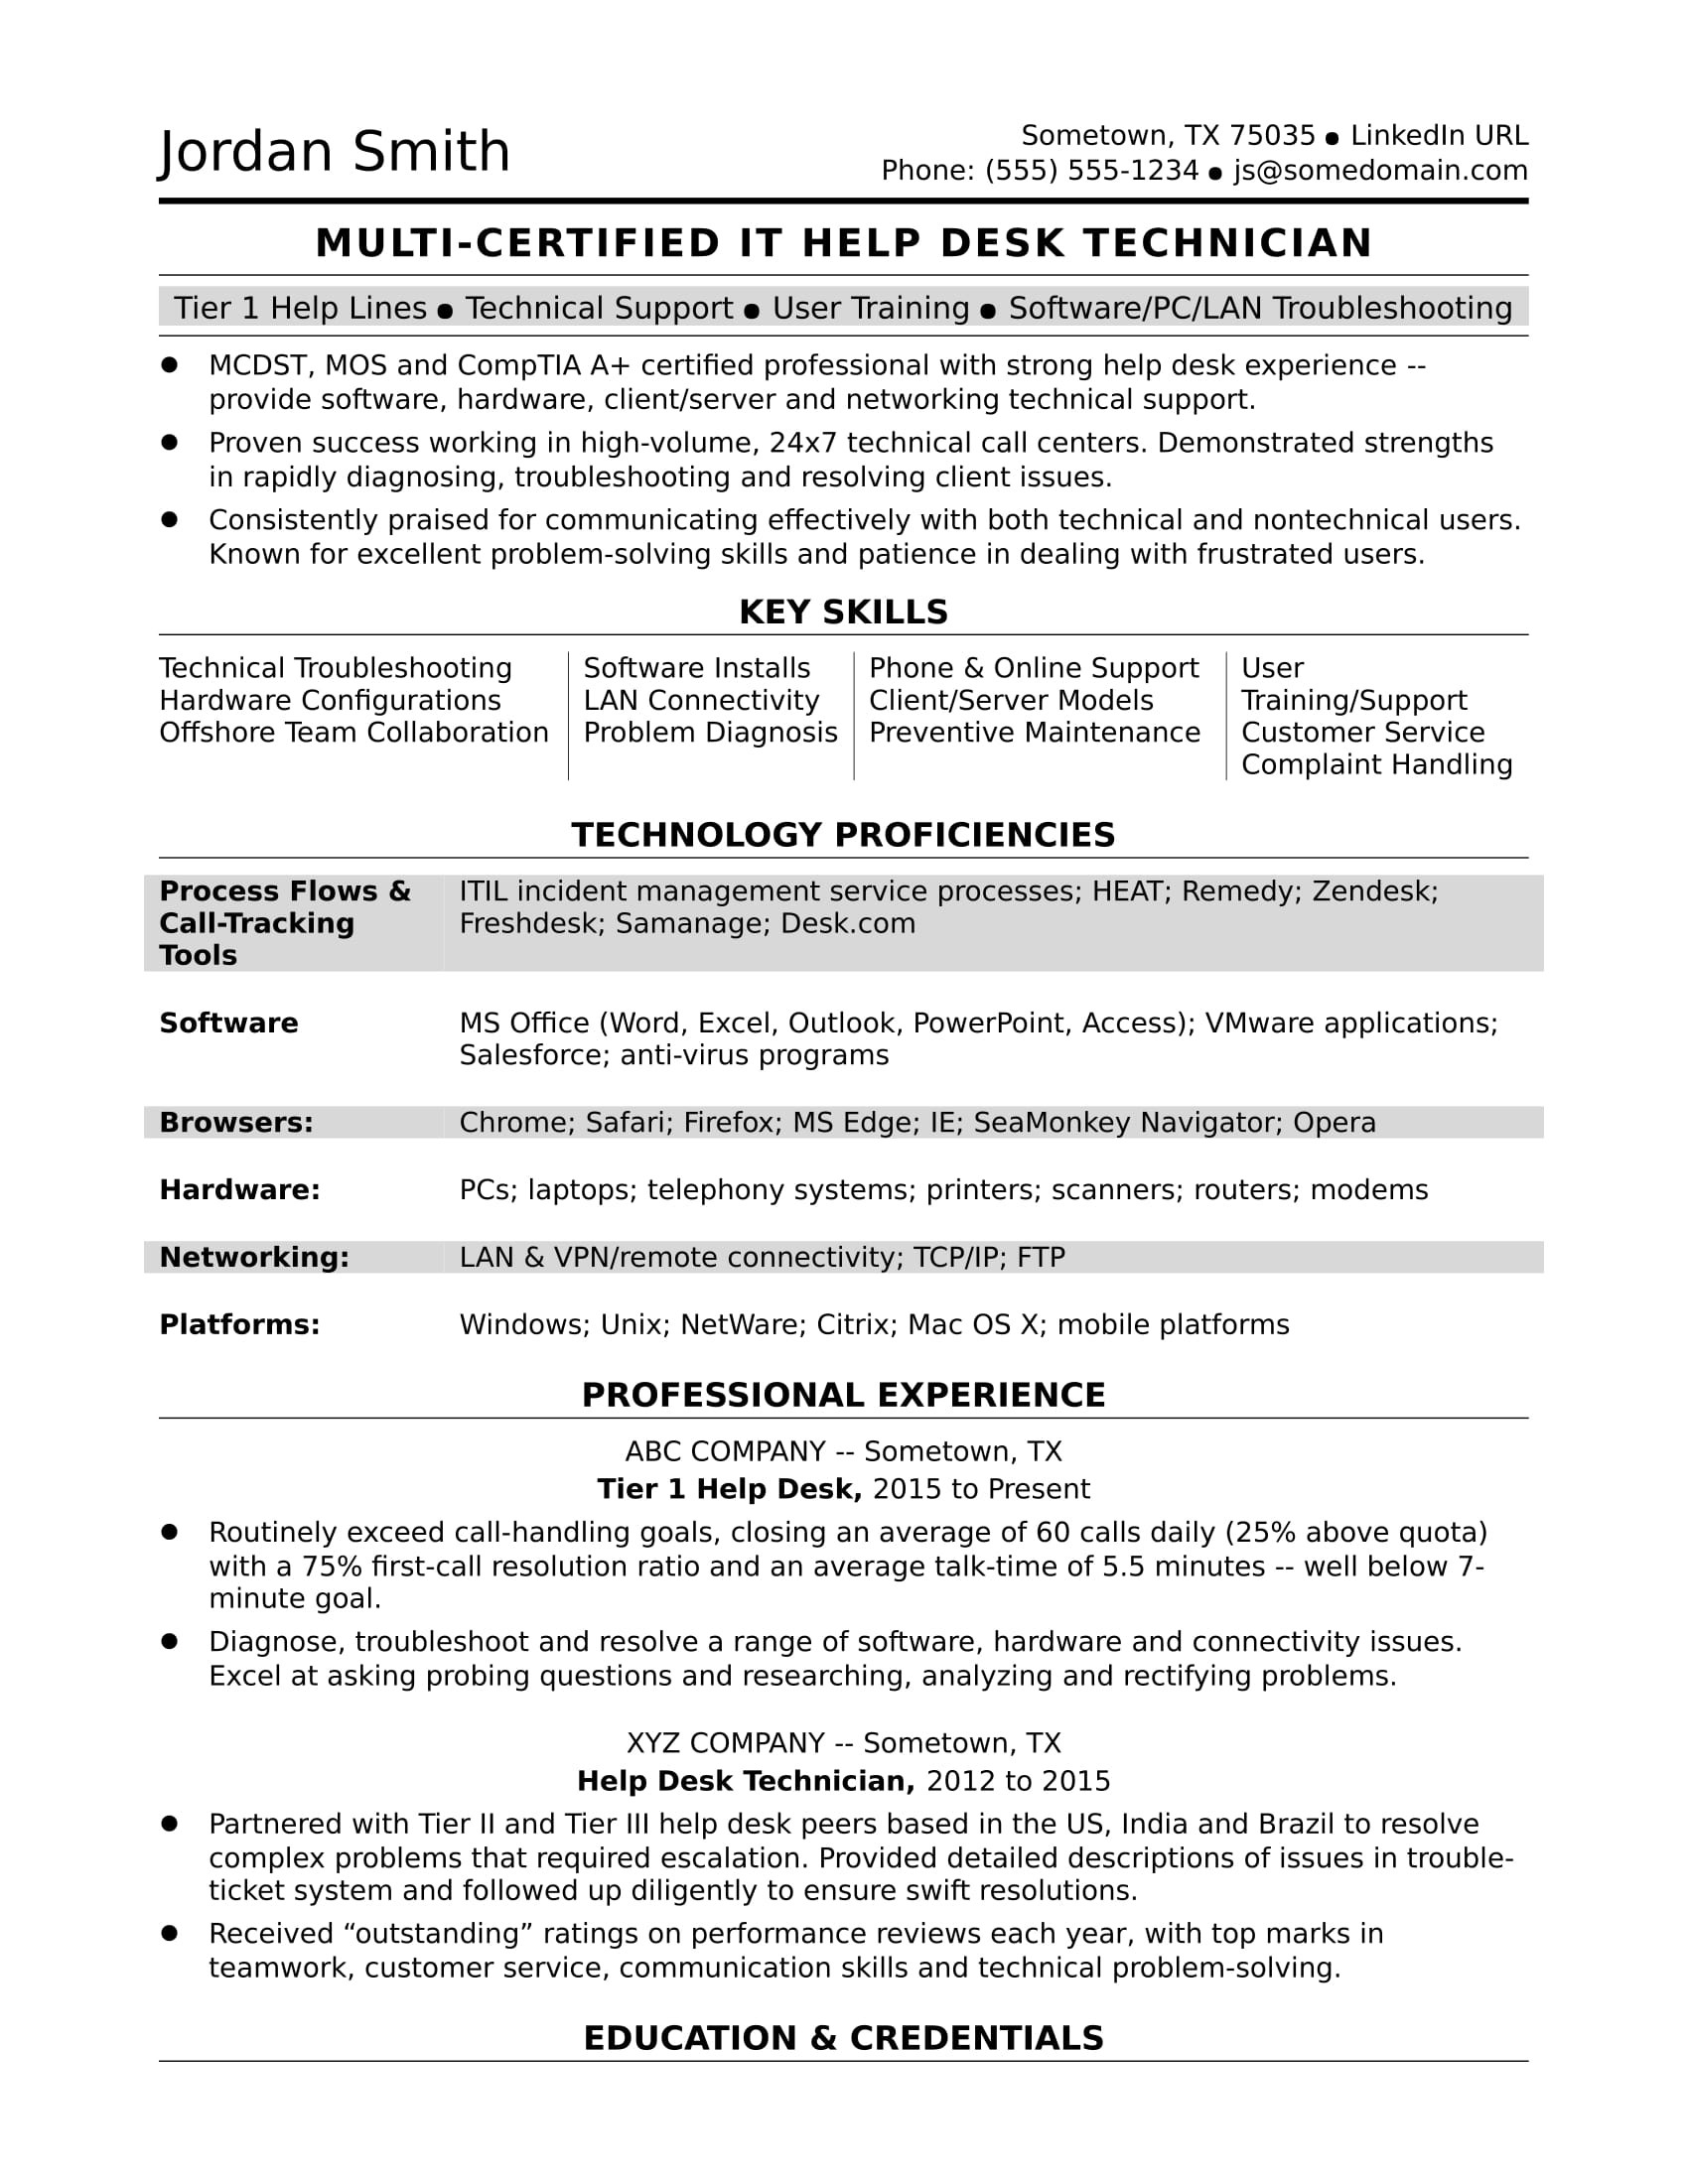 Sample Resume with Comp Tia Security Credentials Sample Resume for A Midlevel It Help Desk Professional Monster.com